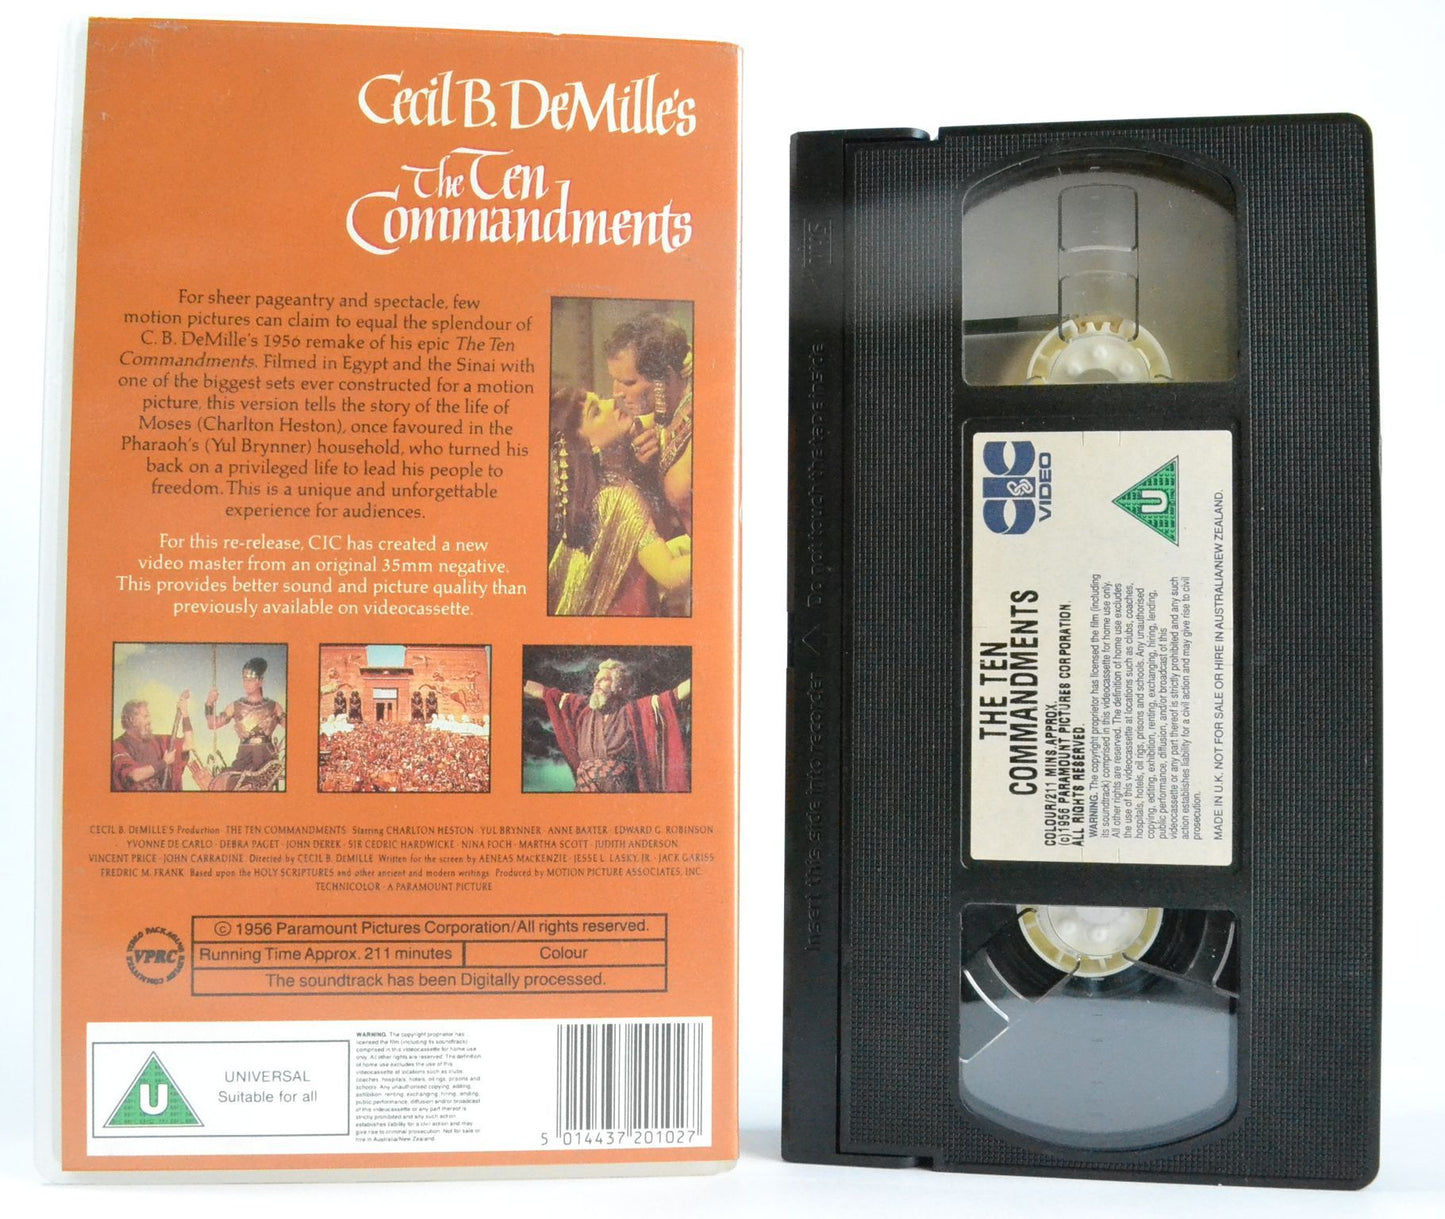 The Ten Commandments: Cicil B. DeMille - Digitally Remastered (1956) Classic - VHS-